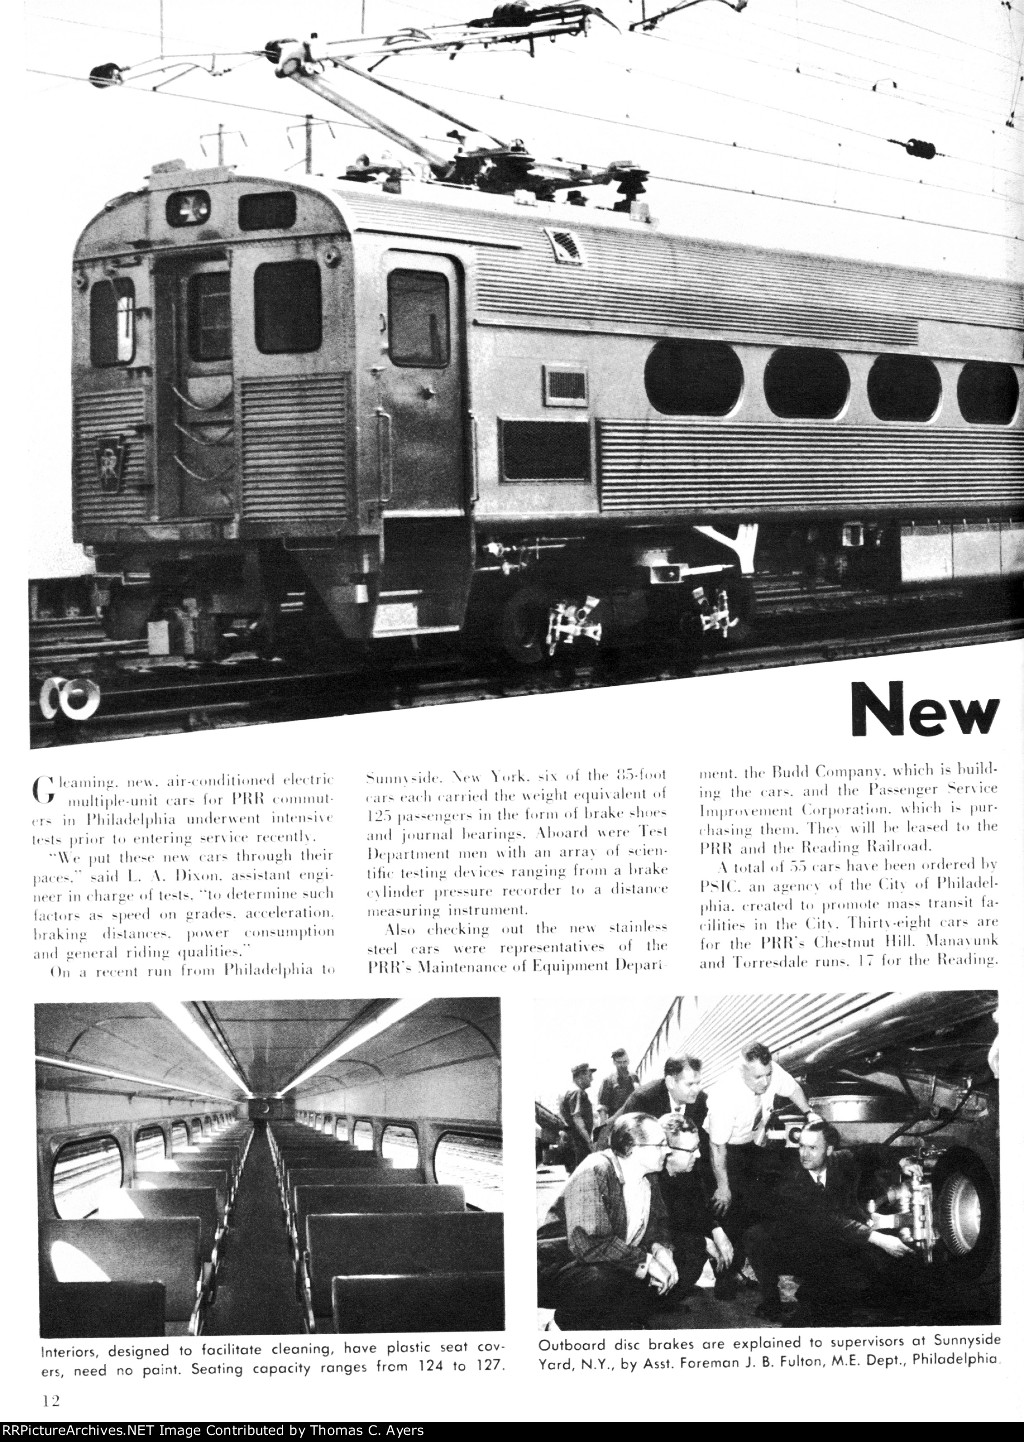 "New Cars For Commuters," Page 12, 1963